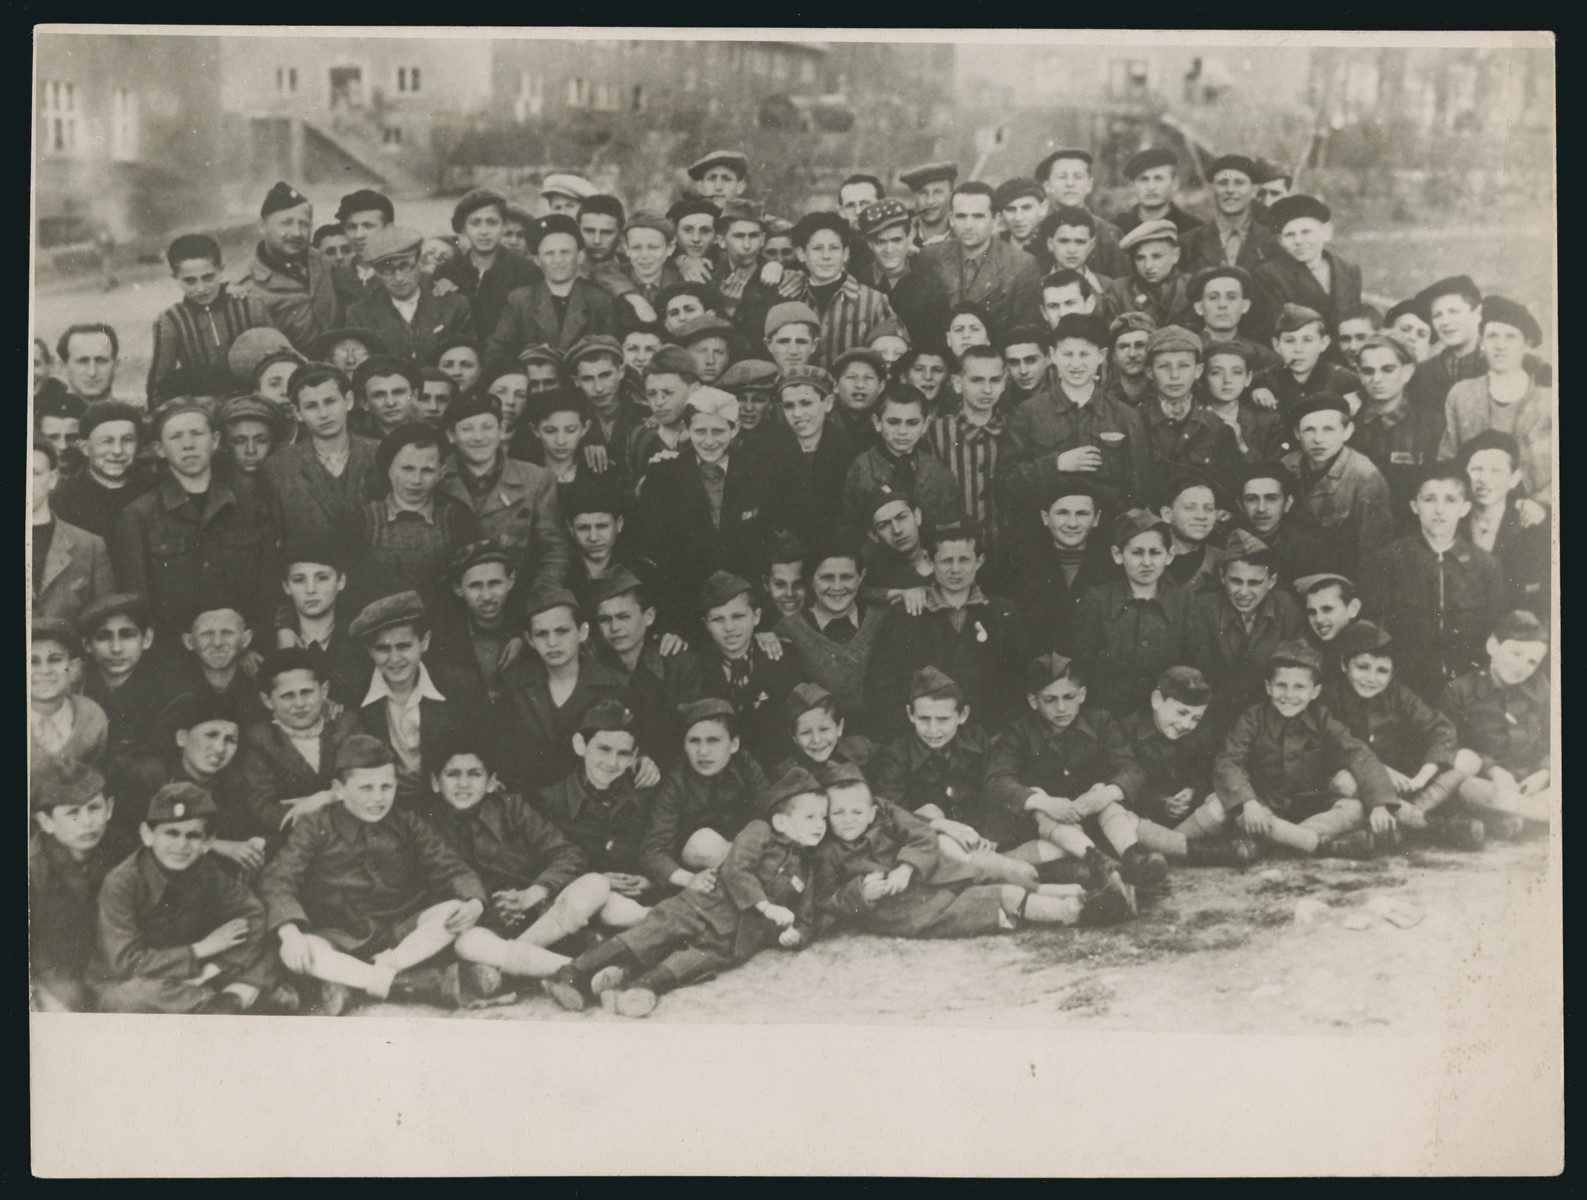 Group portrait of the Buchenwald Boys before they left for France and Switzerland.

American Army chaplain, Rabbi Robert Marcus is pictured on the top left.